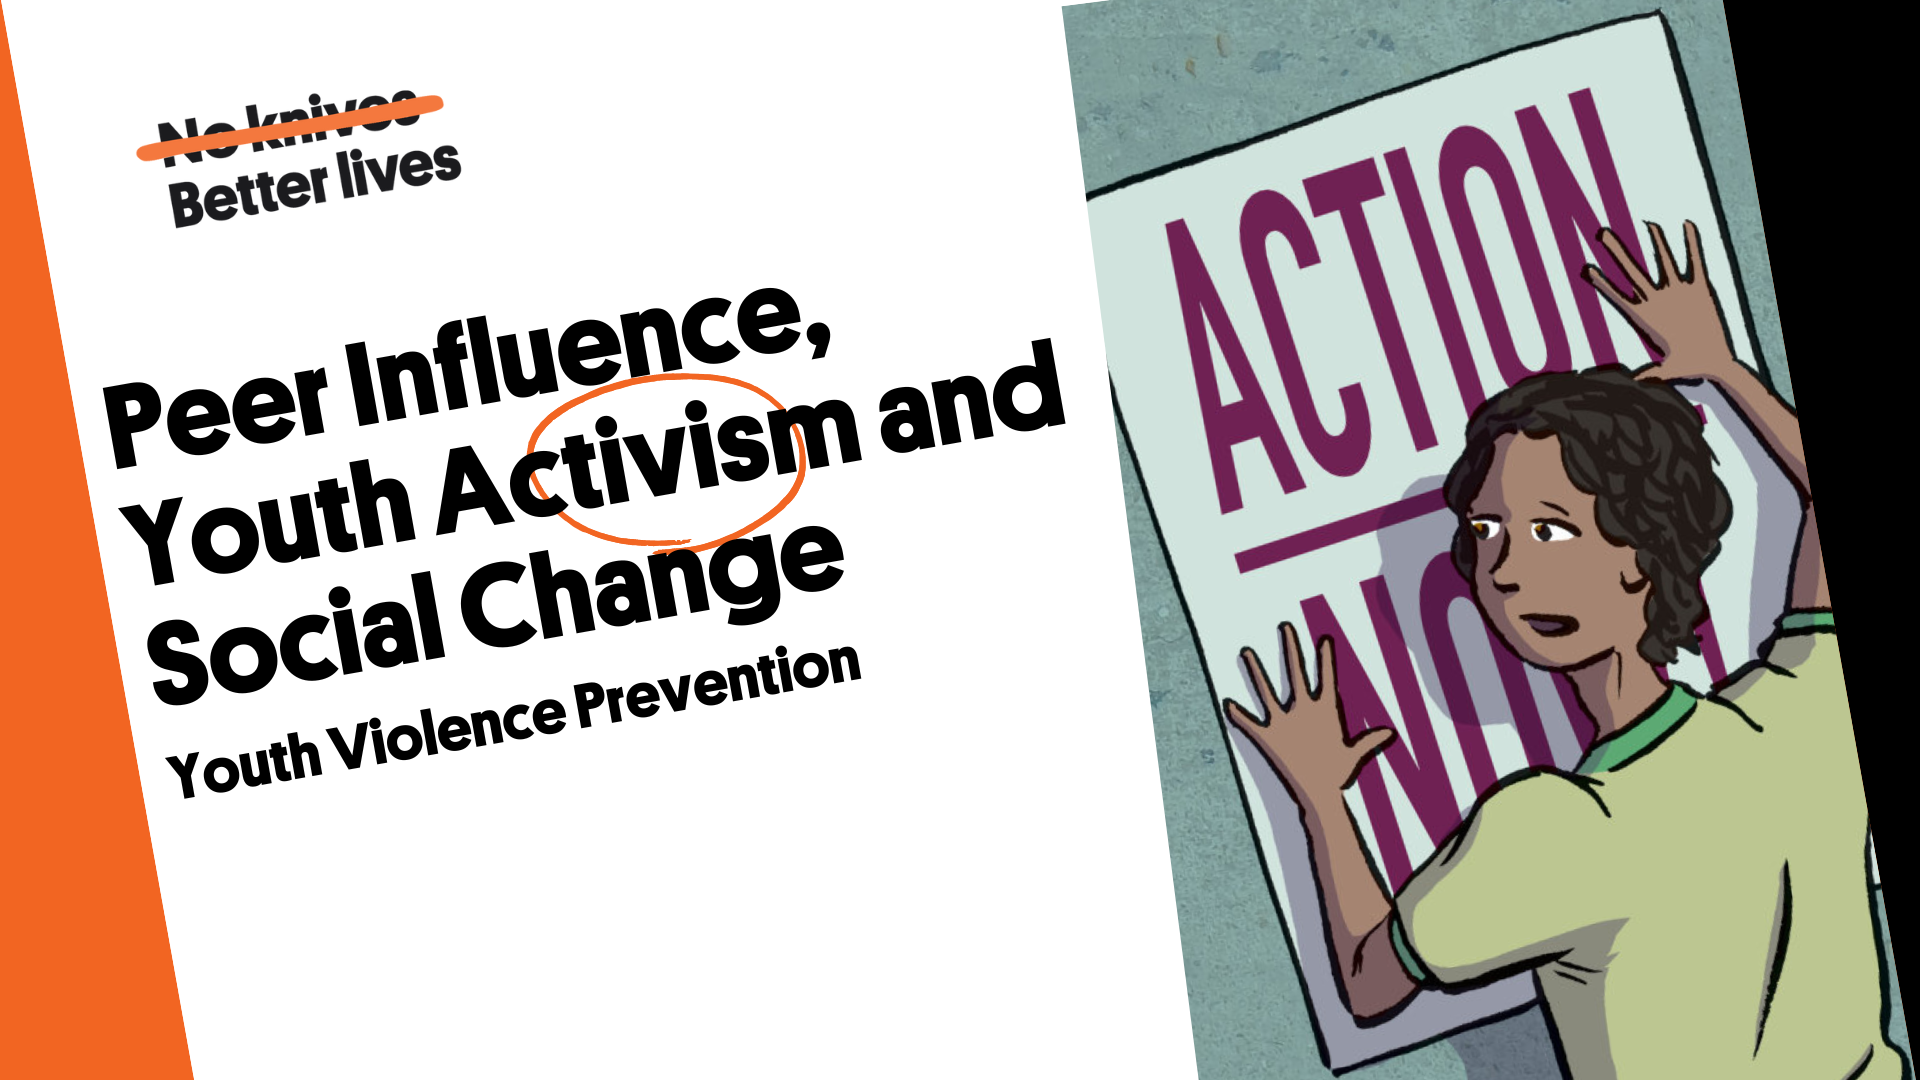 Peer Influence, Youth Activism and Social Change